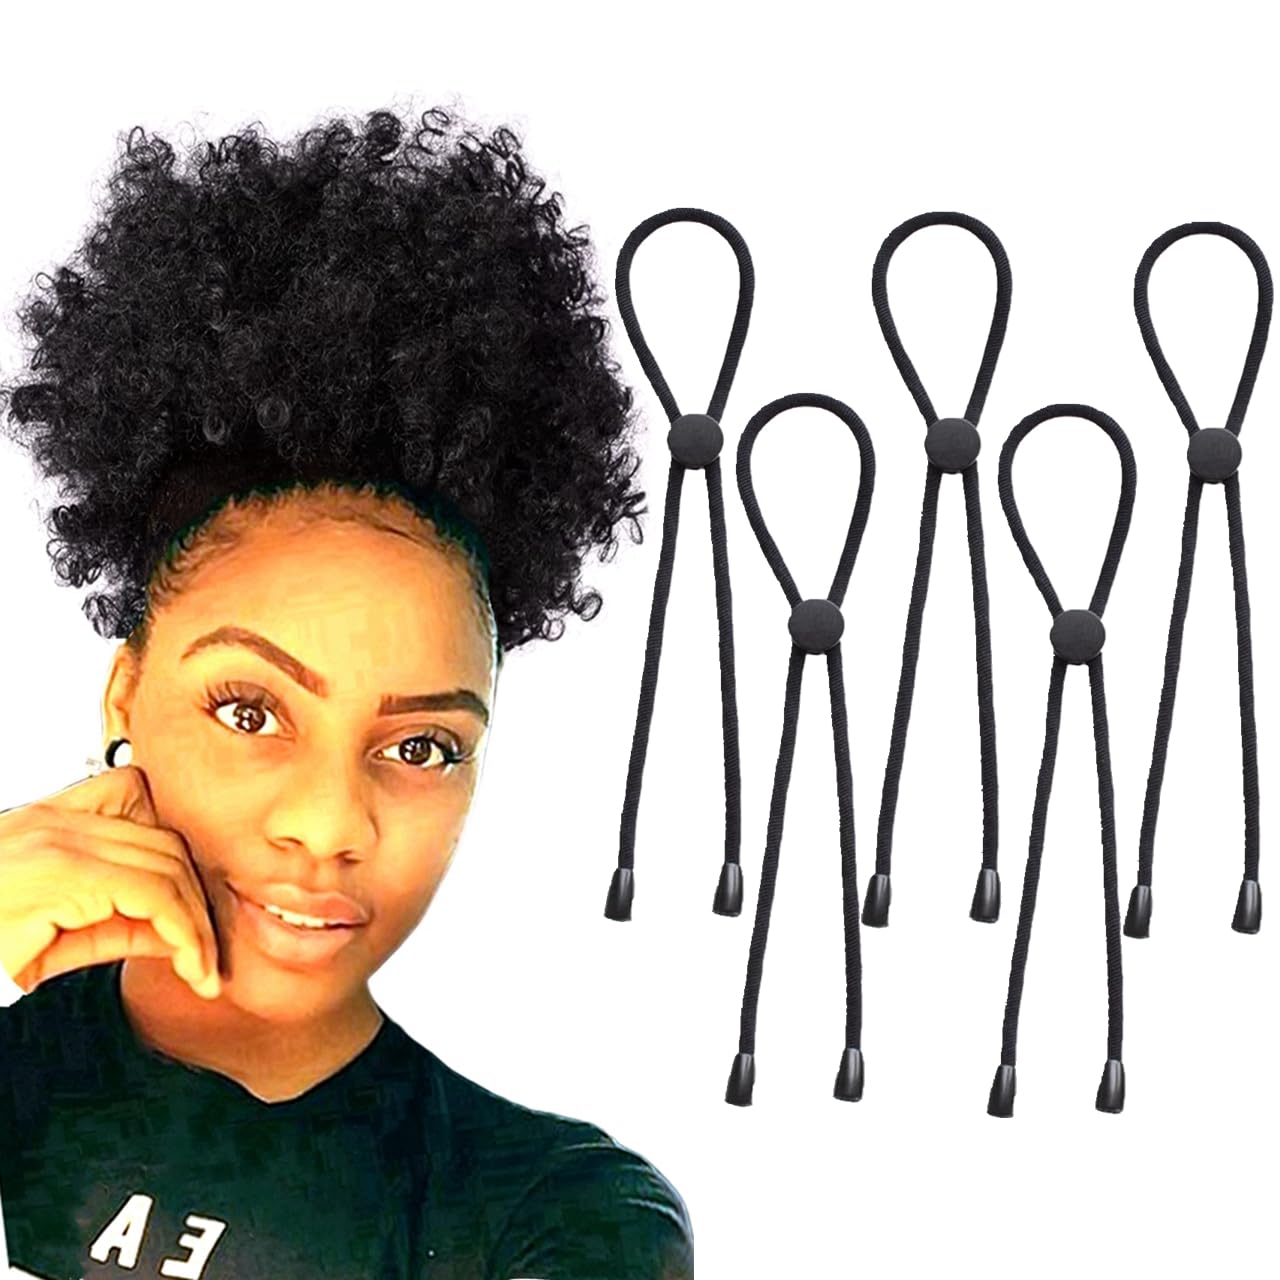 AICILY 5pcs New Adjustable Hair Ties Long Hair Holder Afro Puff Ponytail Ties Length Hairband for Women with Natrual Curly Hair Thick,Loc,Braided